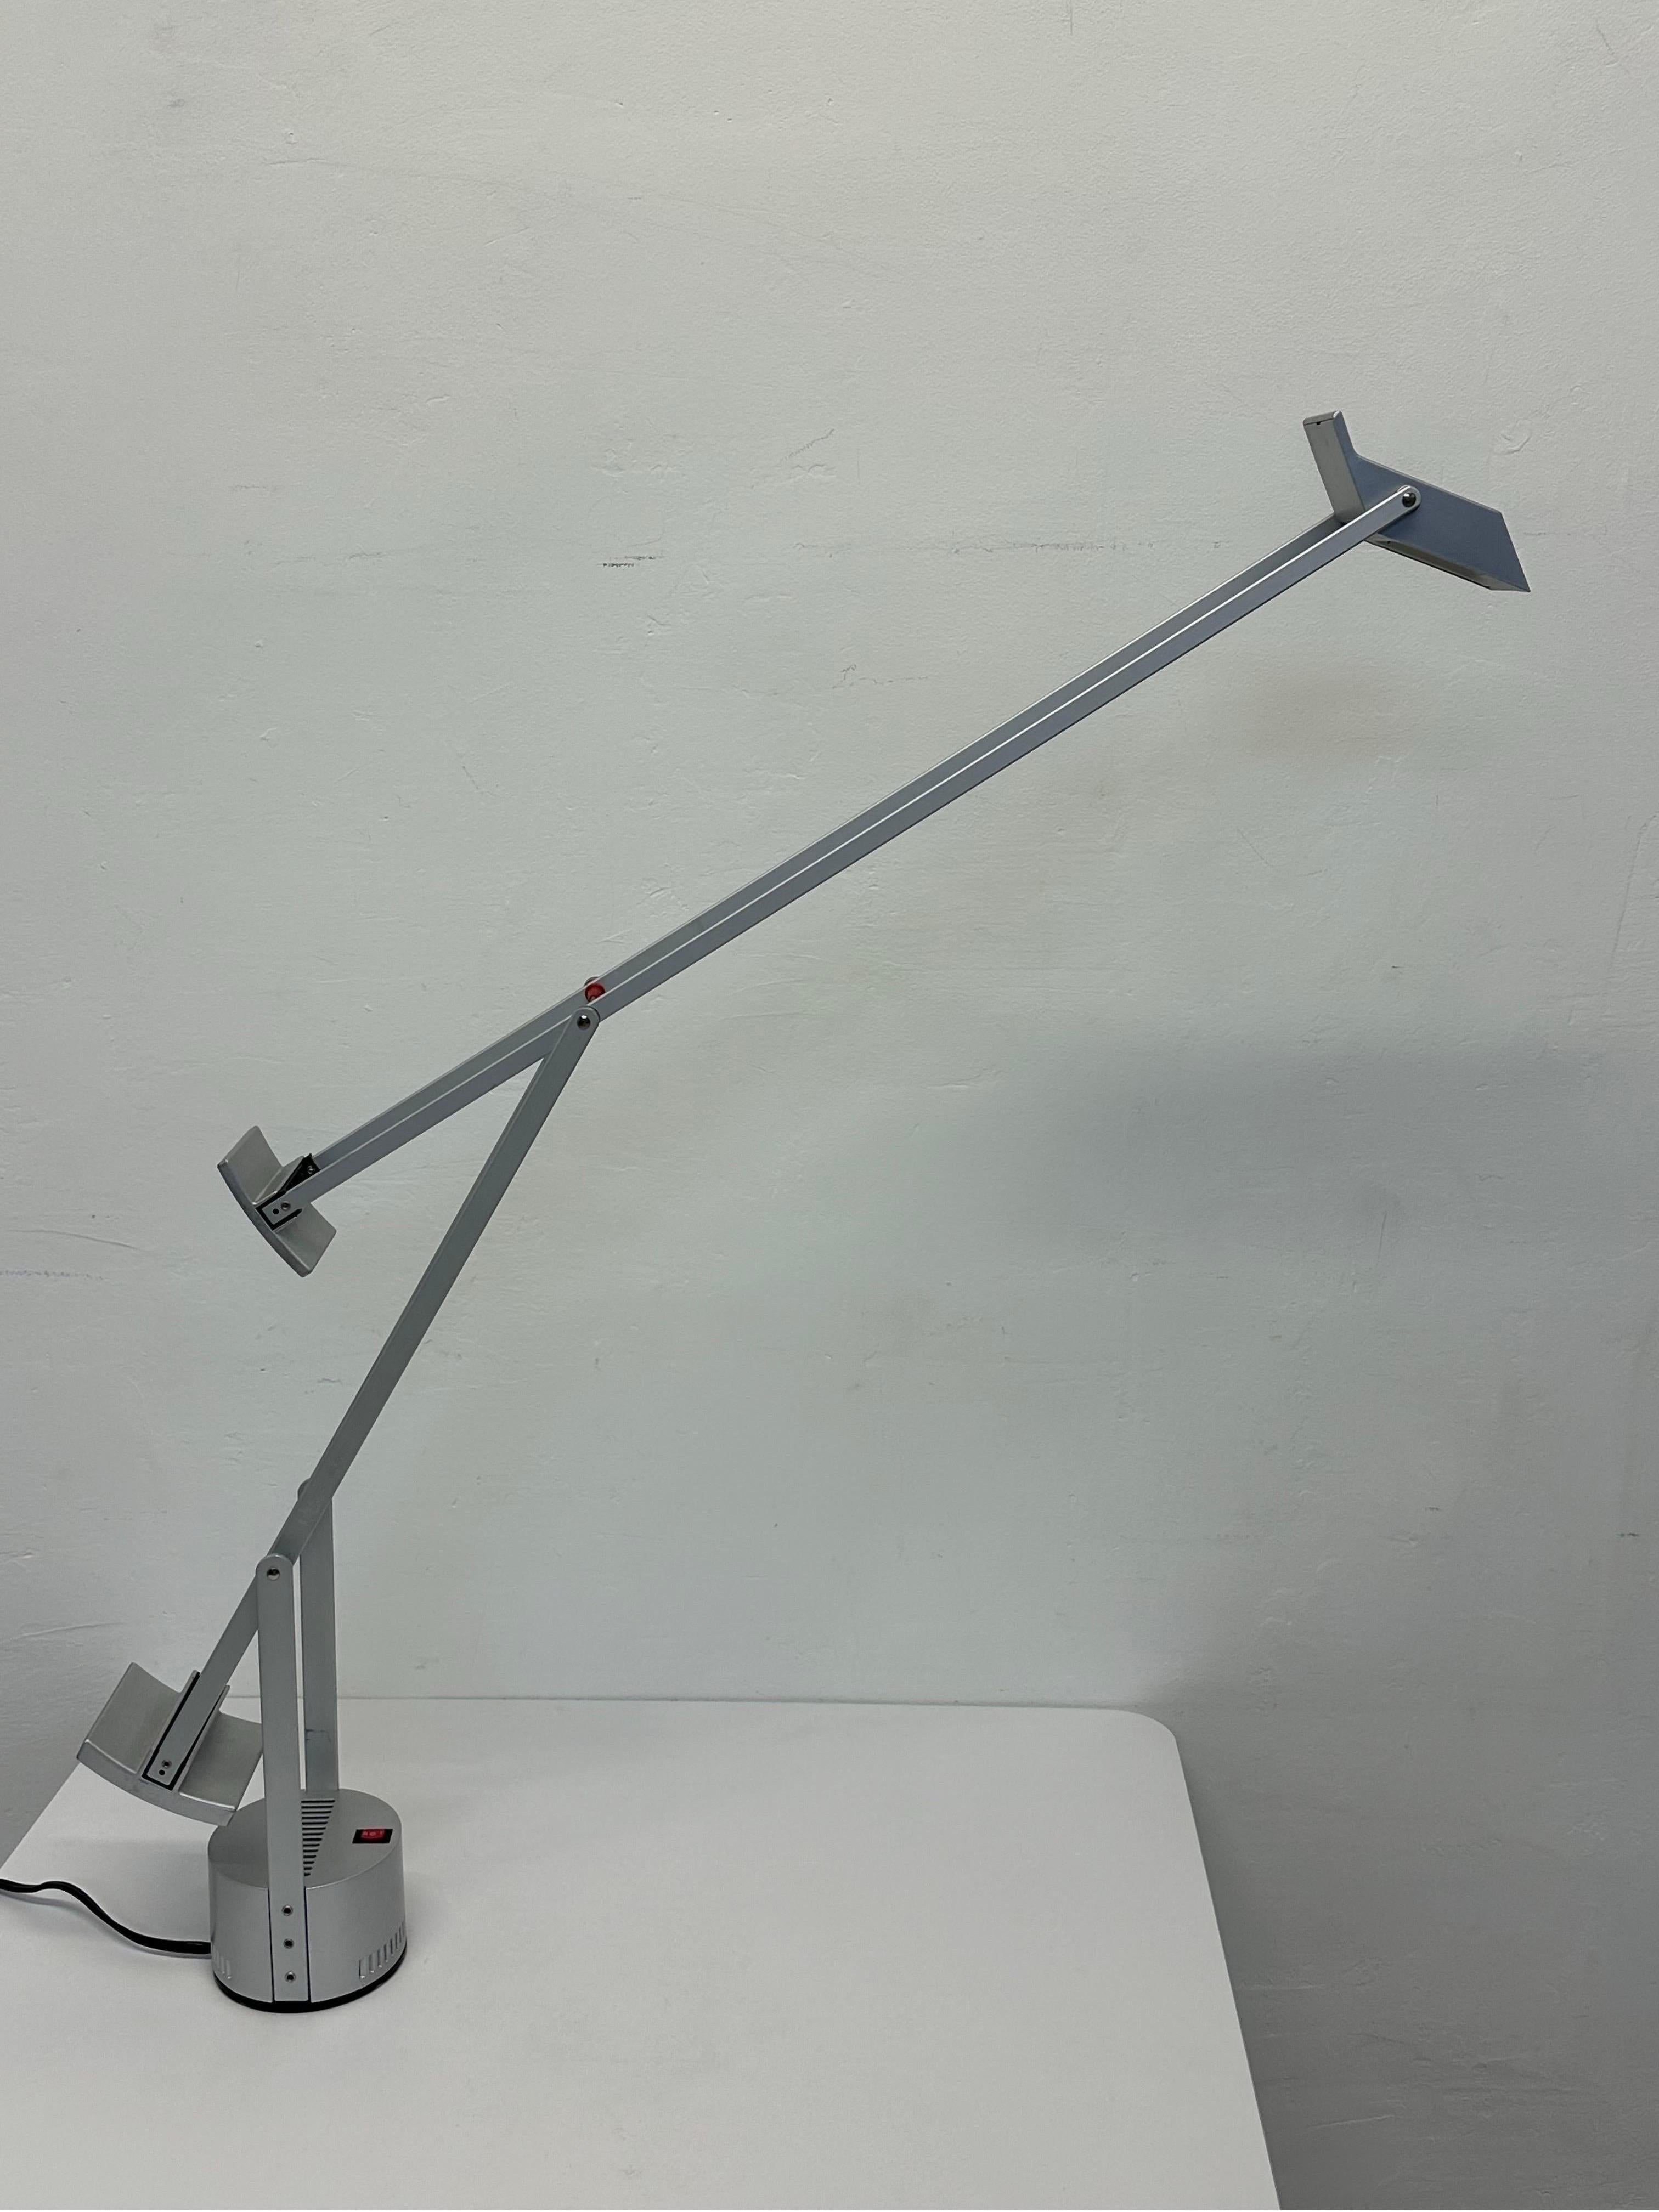 Rare, signed Tizio table or desk lamp from the first production run of silver and red color scheme.  Only 3000 lamps were produced and the lamp is numbered 1043.  Fully adjustable and lamps have high/low toggle for desired brightness.